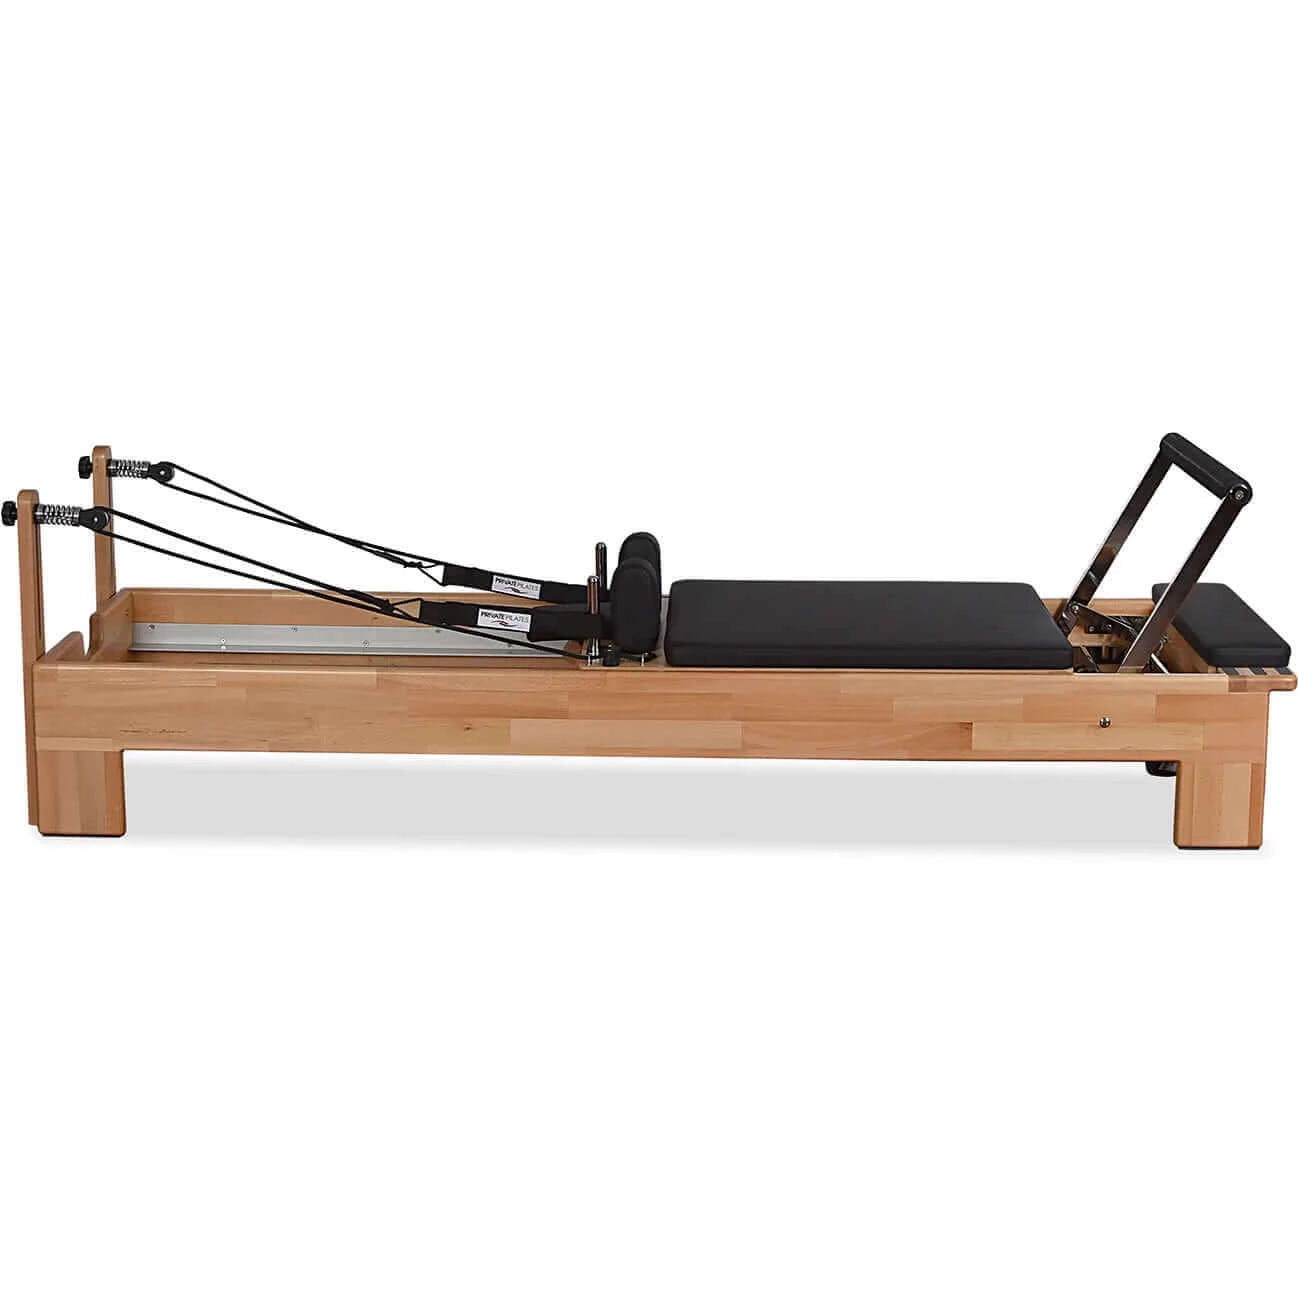 Black Private Pilates Wood Reformer Machine by Private Pilates sold by Pilates Matters® by BSP LLC